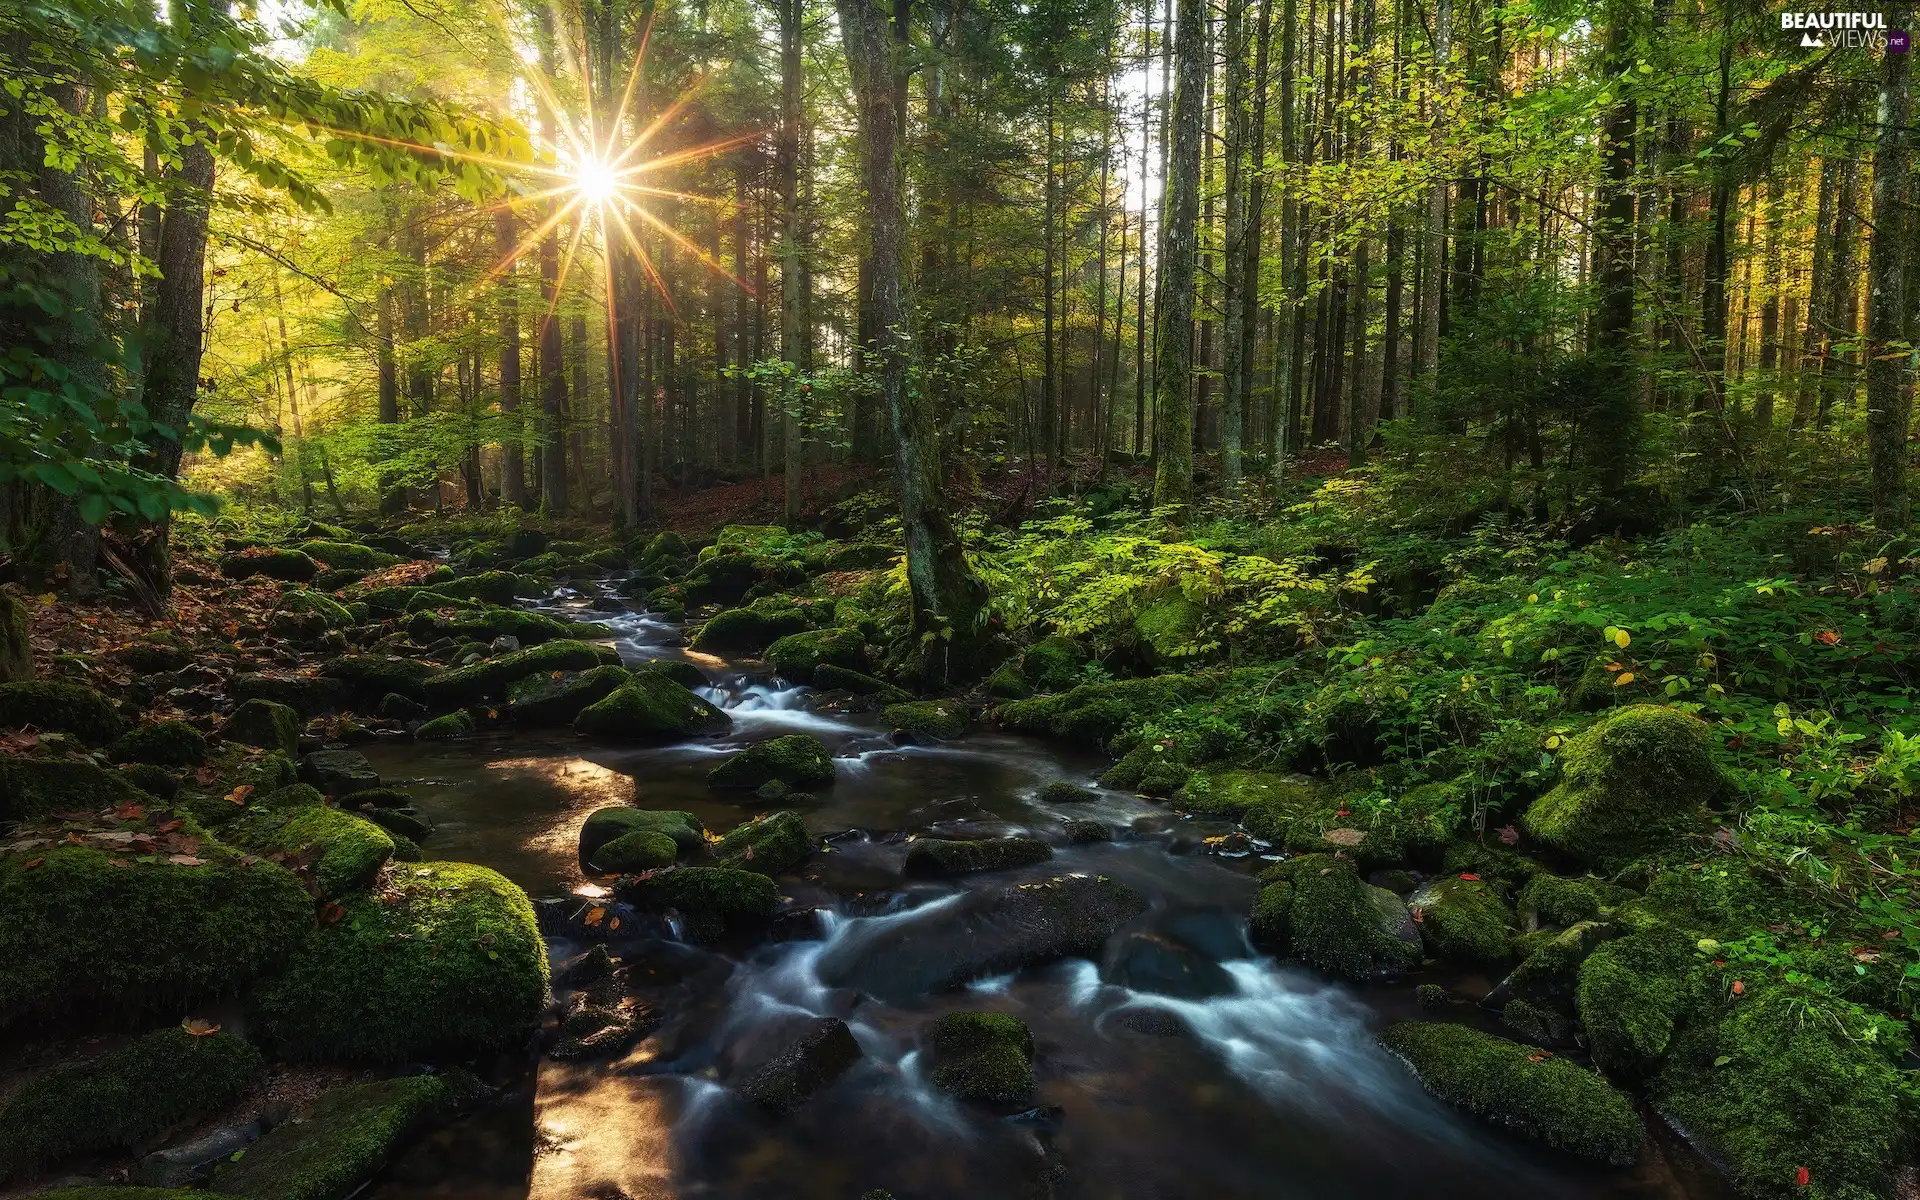 viewes, rays of the Sun, VEGETATION, stream, Stones, trees, forest, mossy